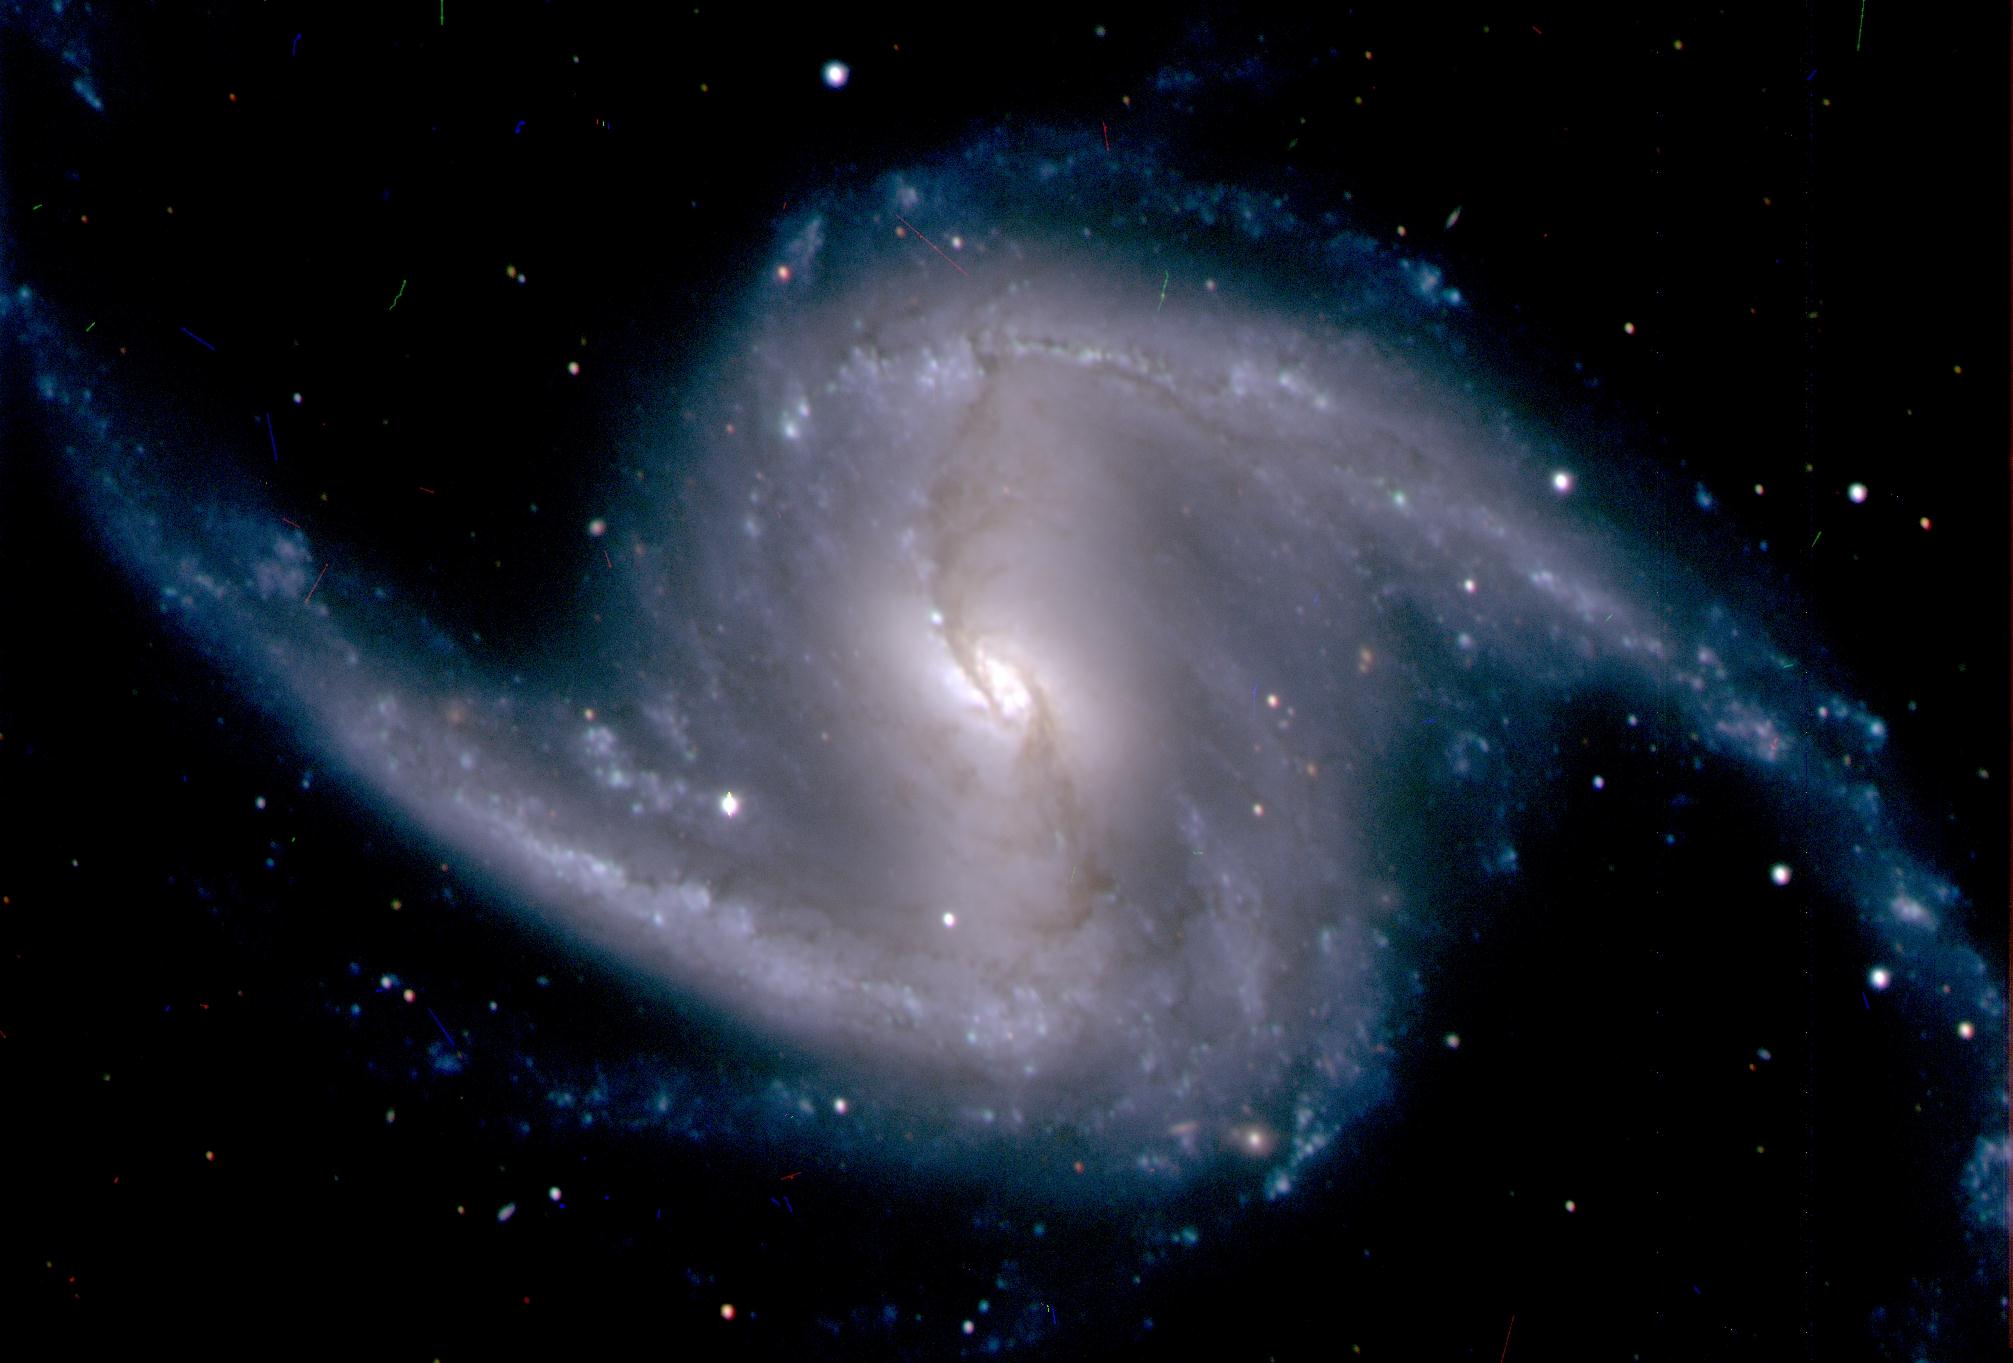 Barred spiral galaxy NGC 1365, in the Fornax cluster of galaxies, which lies